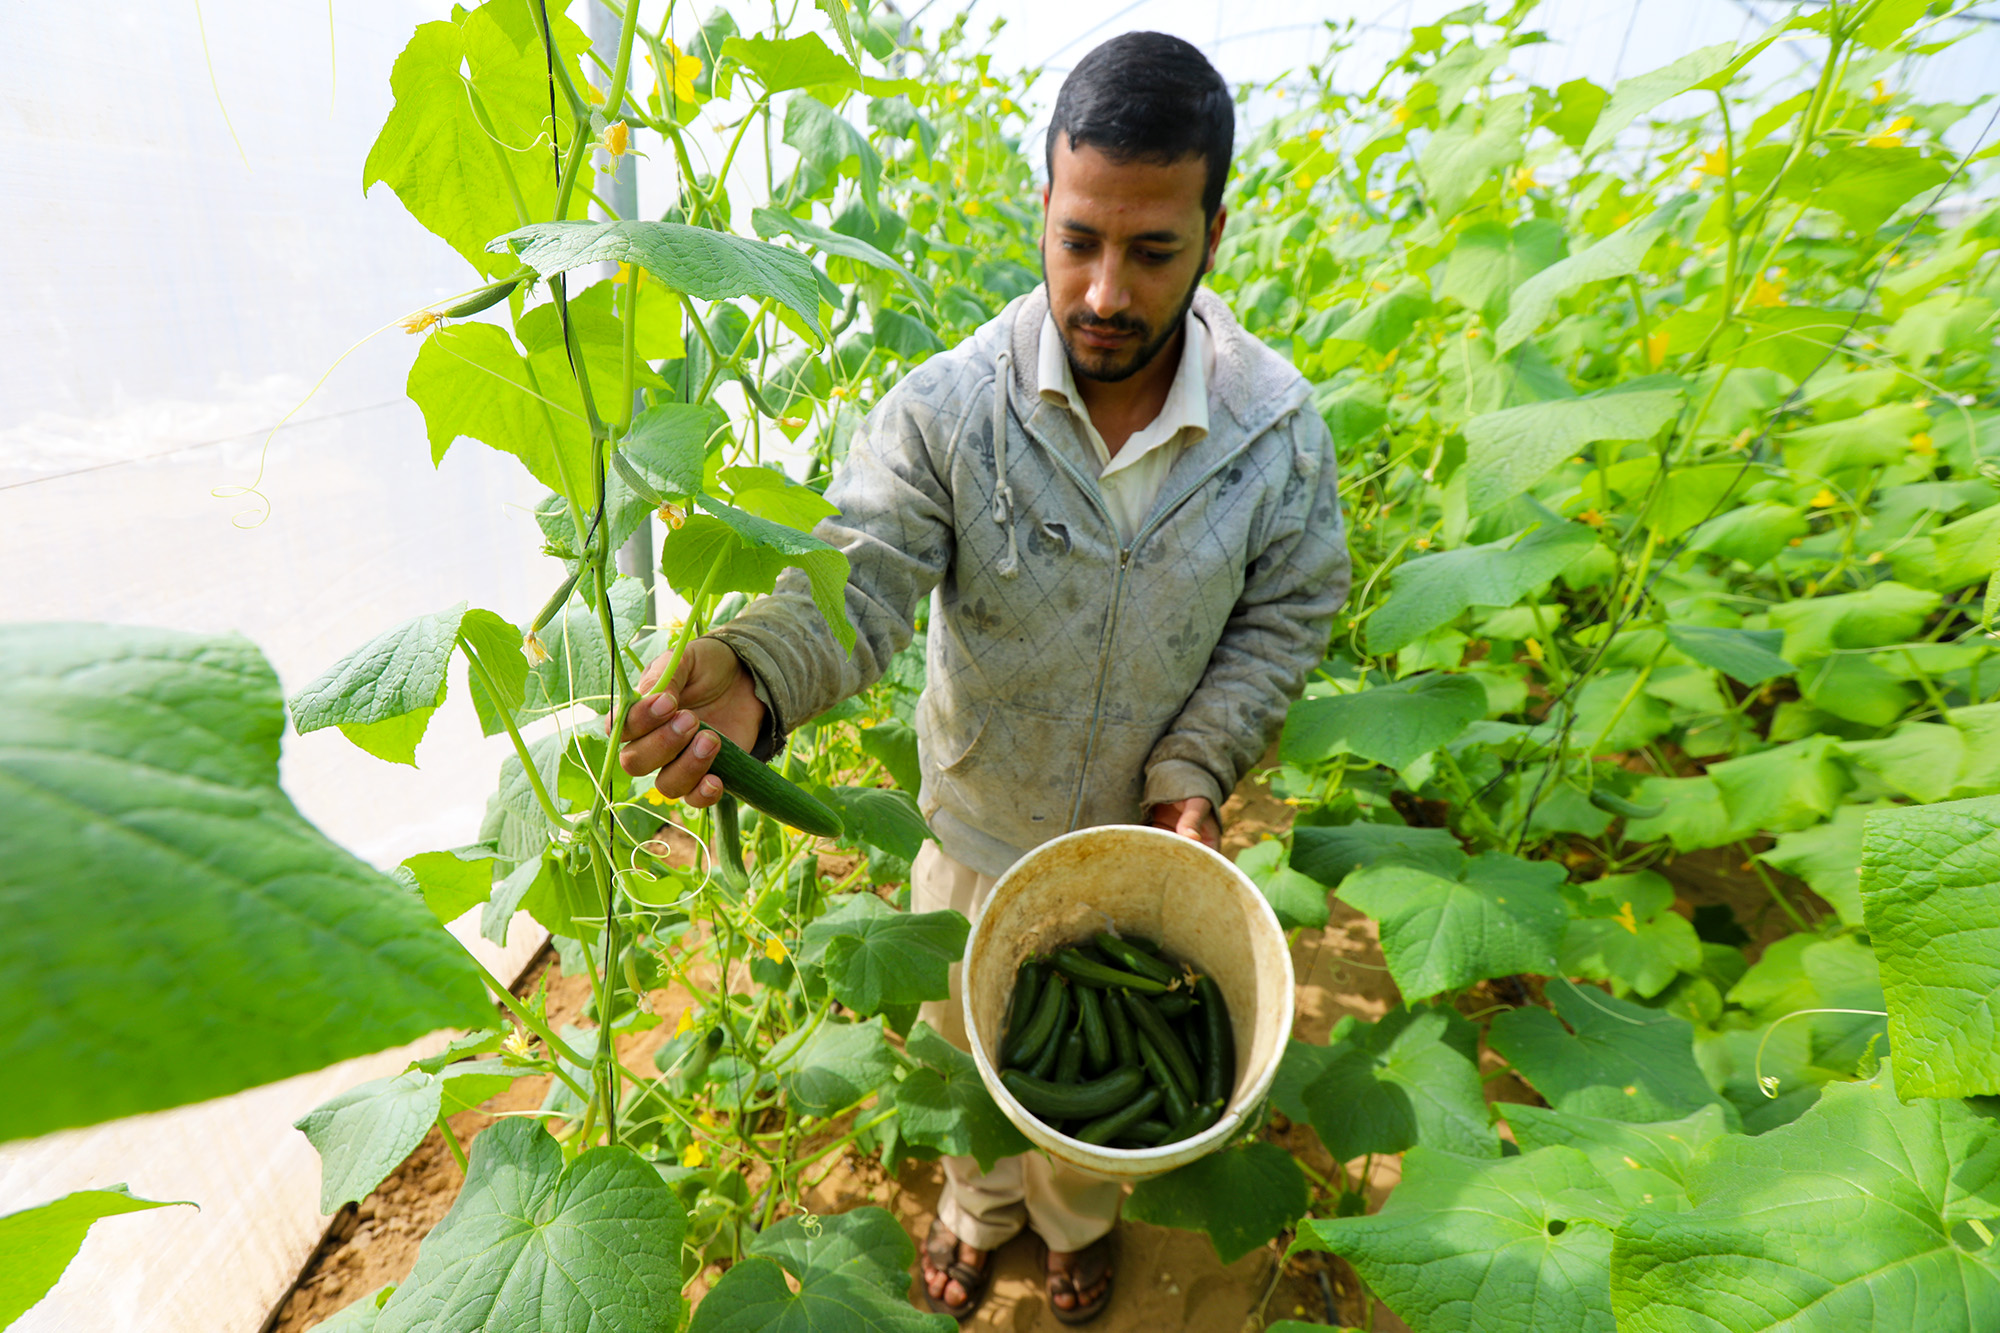 Wael picks his first harvest of cucumbers in his new greenhouse.